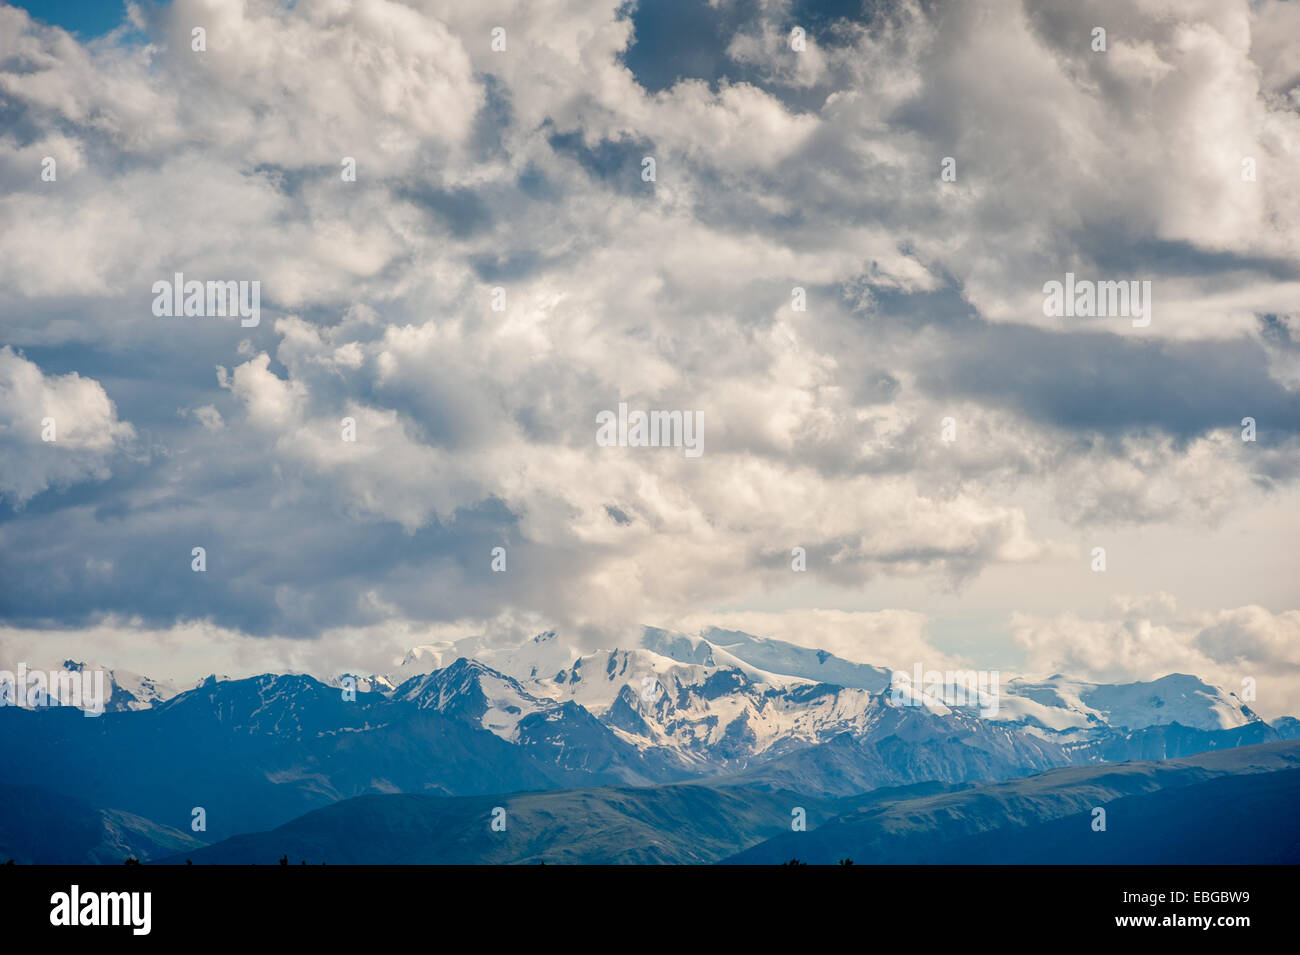 Alaskan mountain range being eclipse with heavy cloud cover Stock Photo